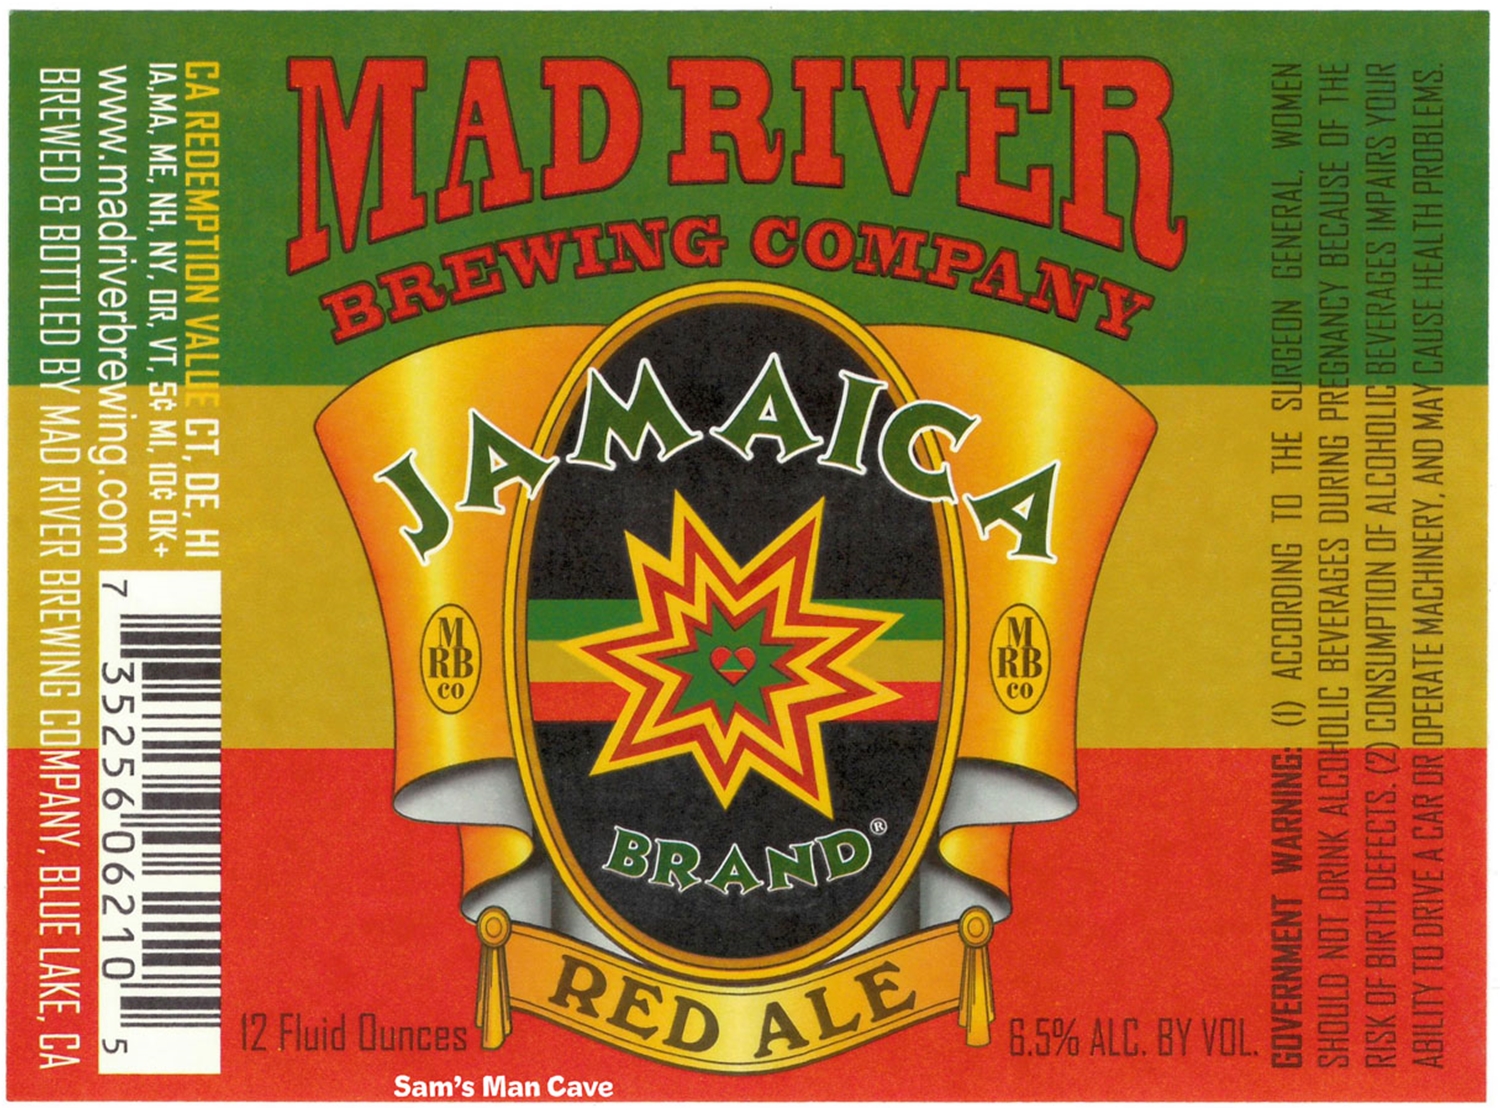 Mad River Jamaica Red Ale Label